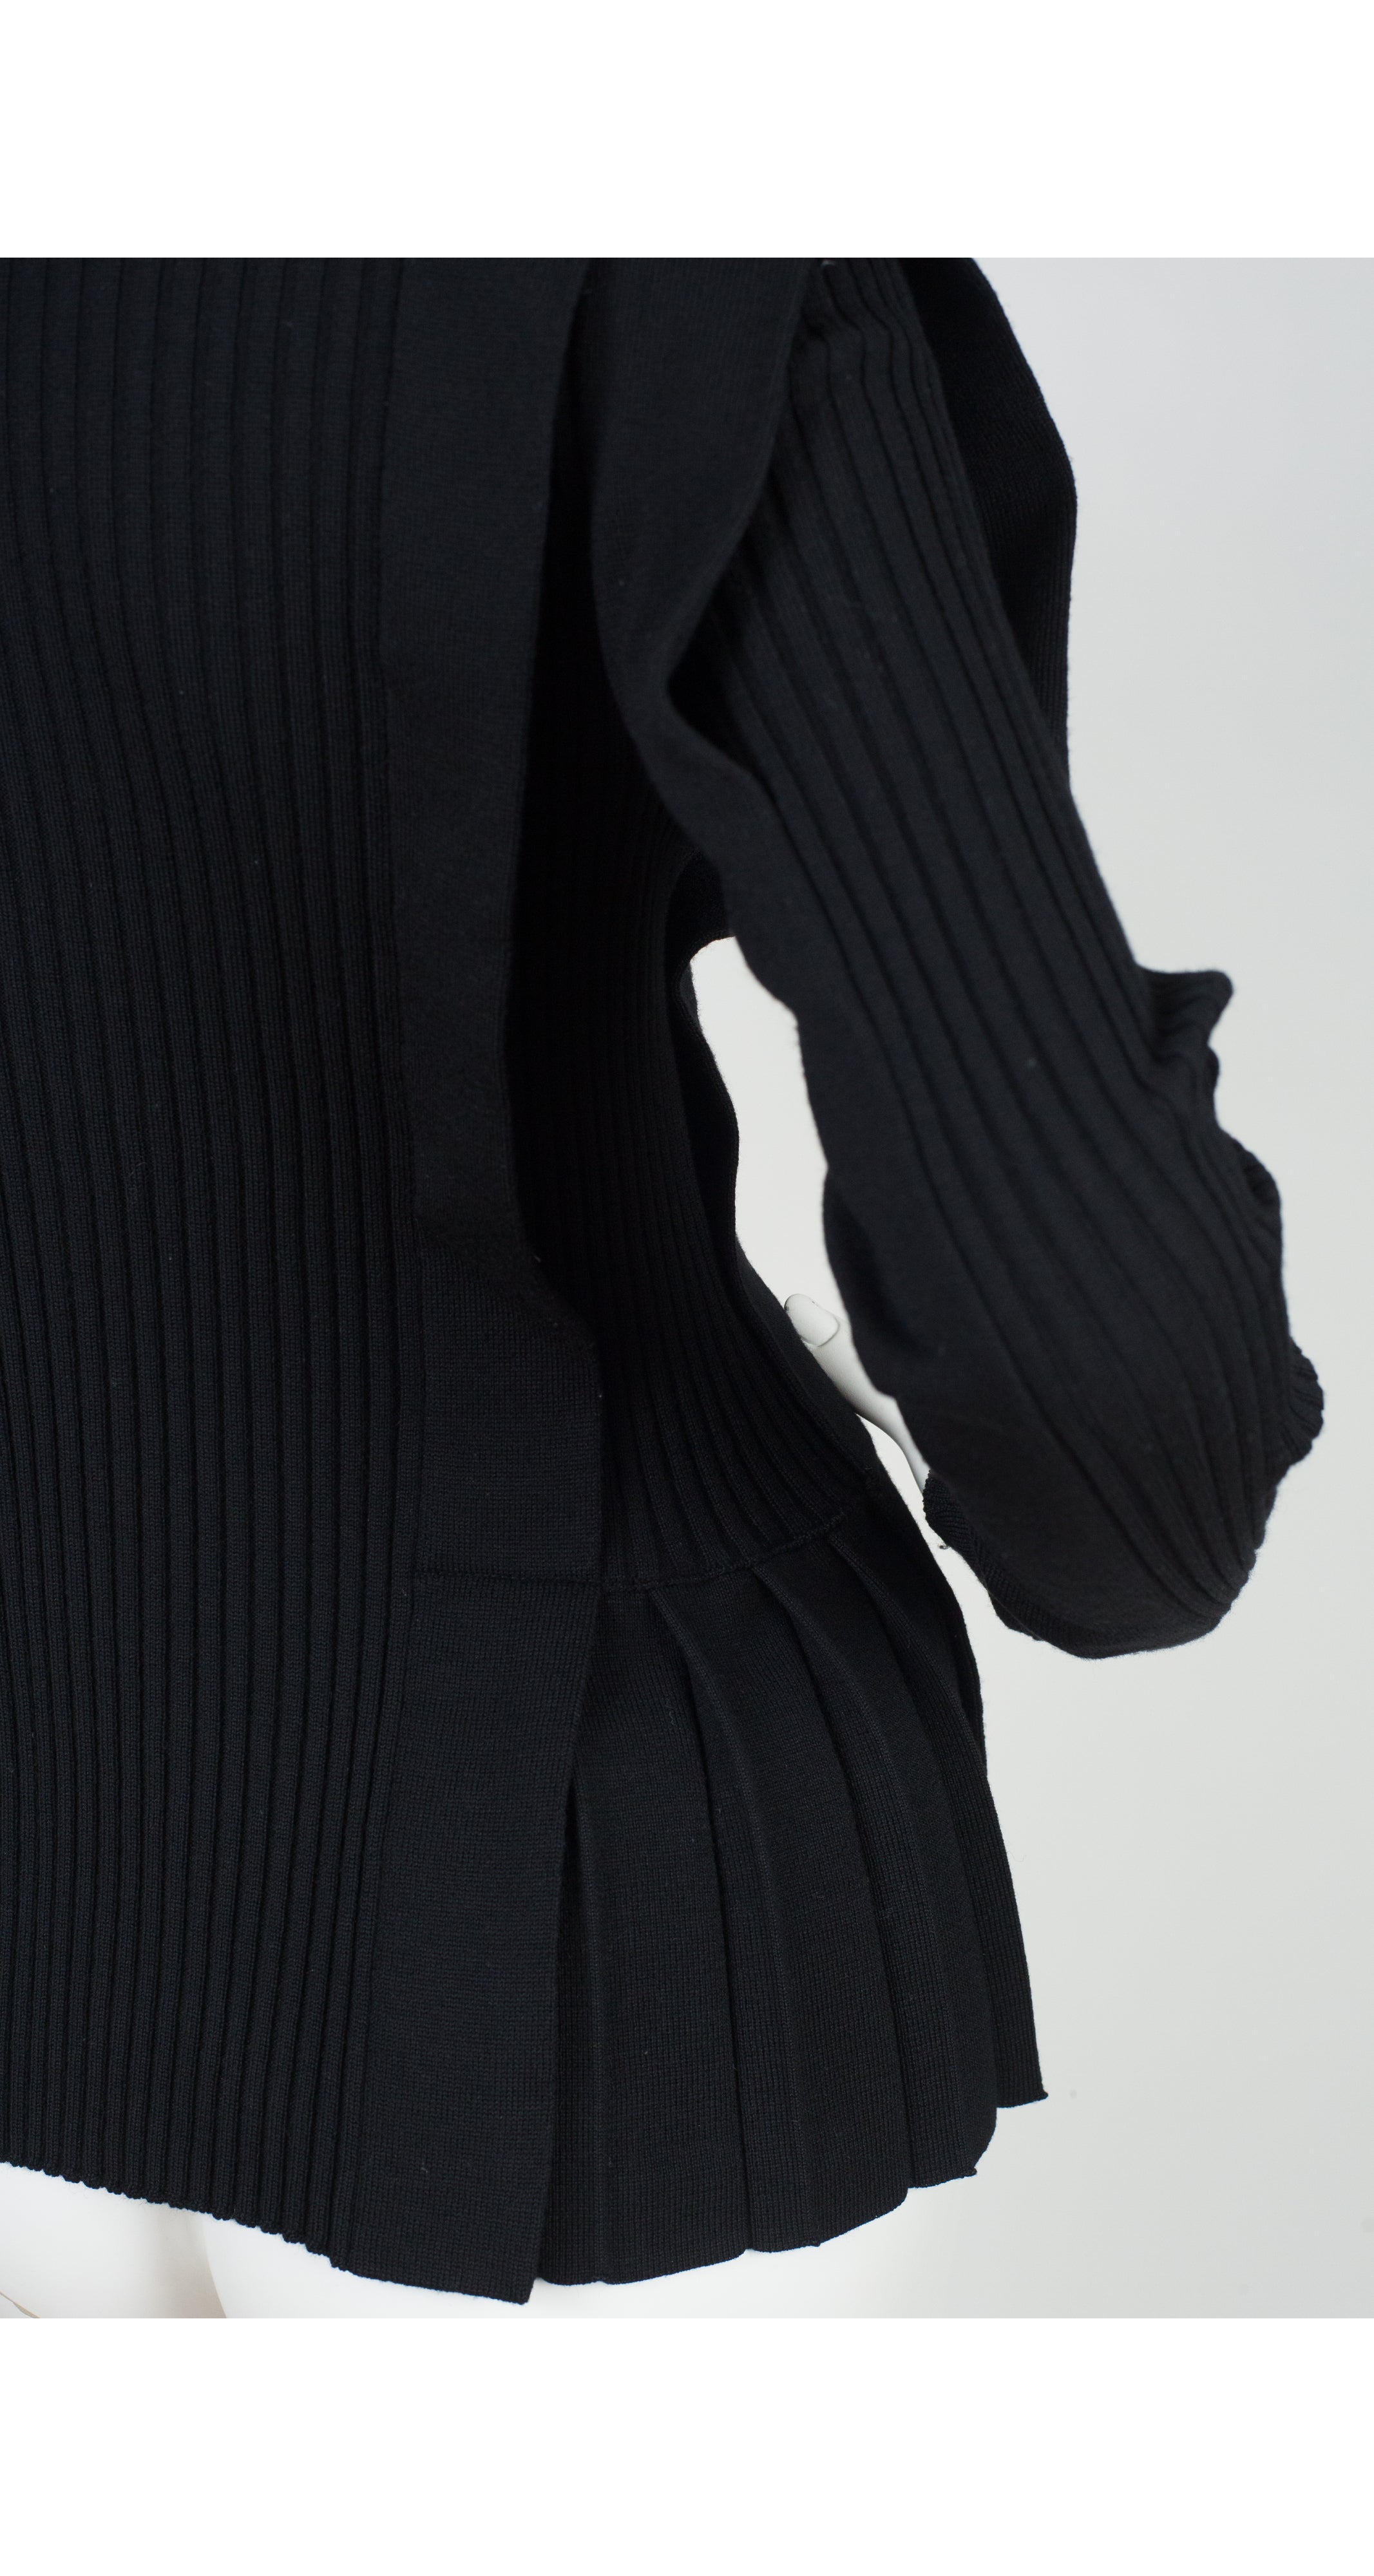 1990s Black Ribbed Wool Knit Zip-Up Sweater